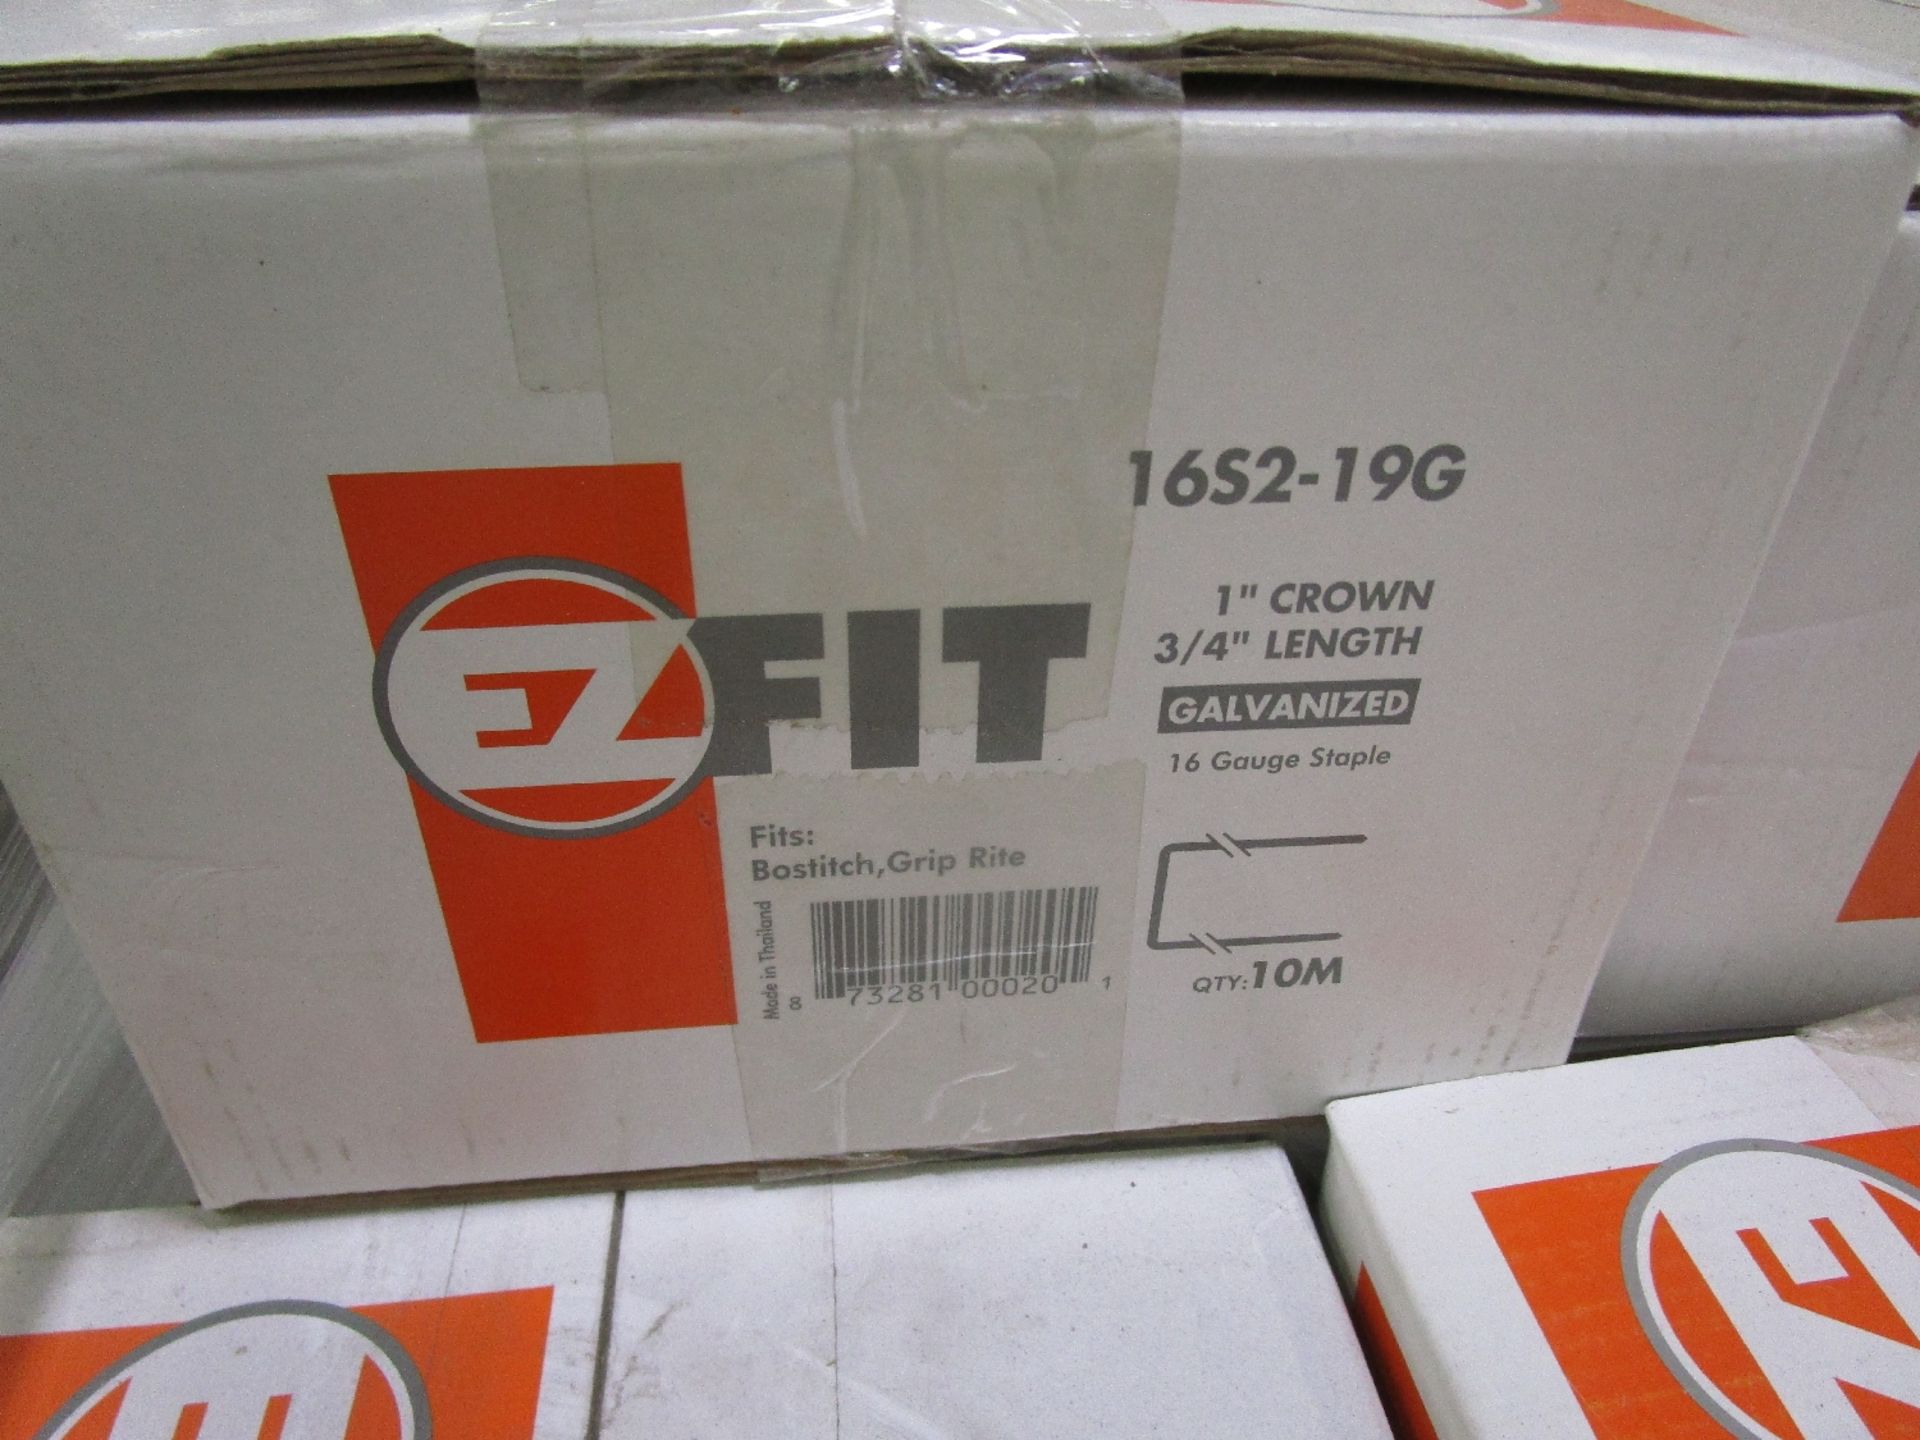 Lot of Ez-fit Crown Staples - Image 2 of 5